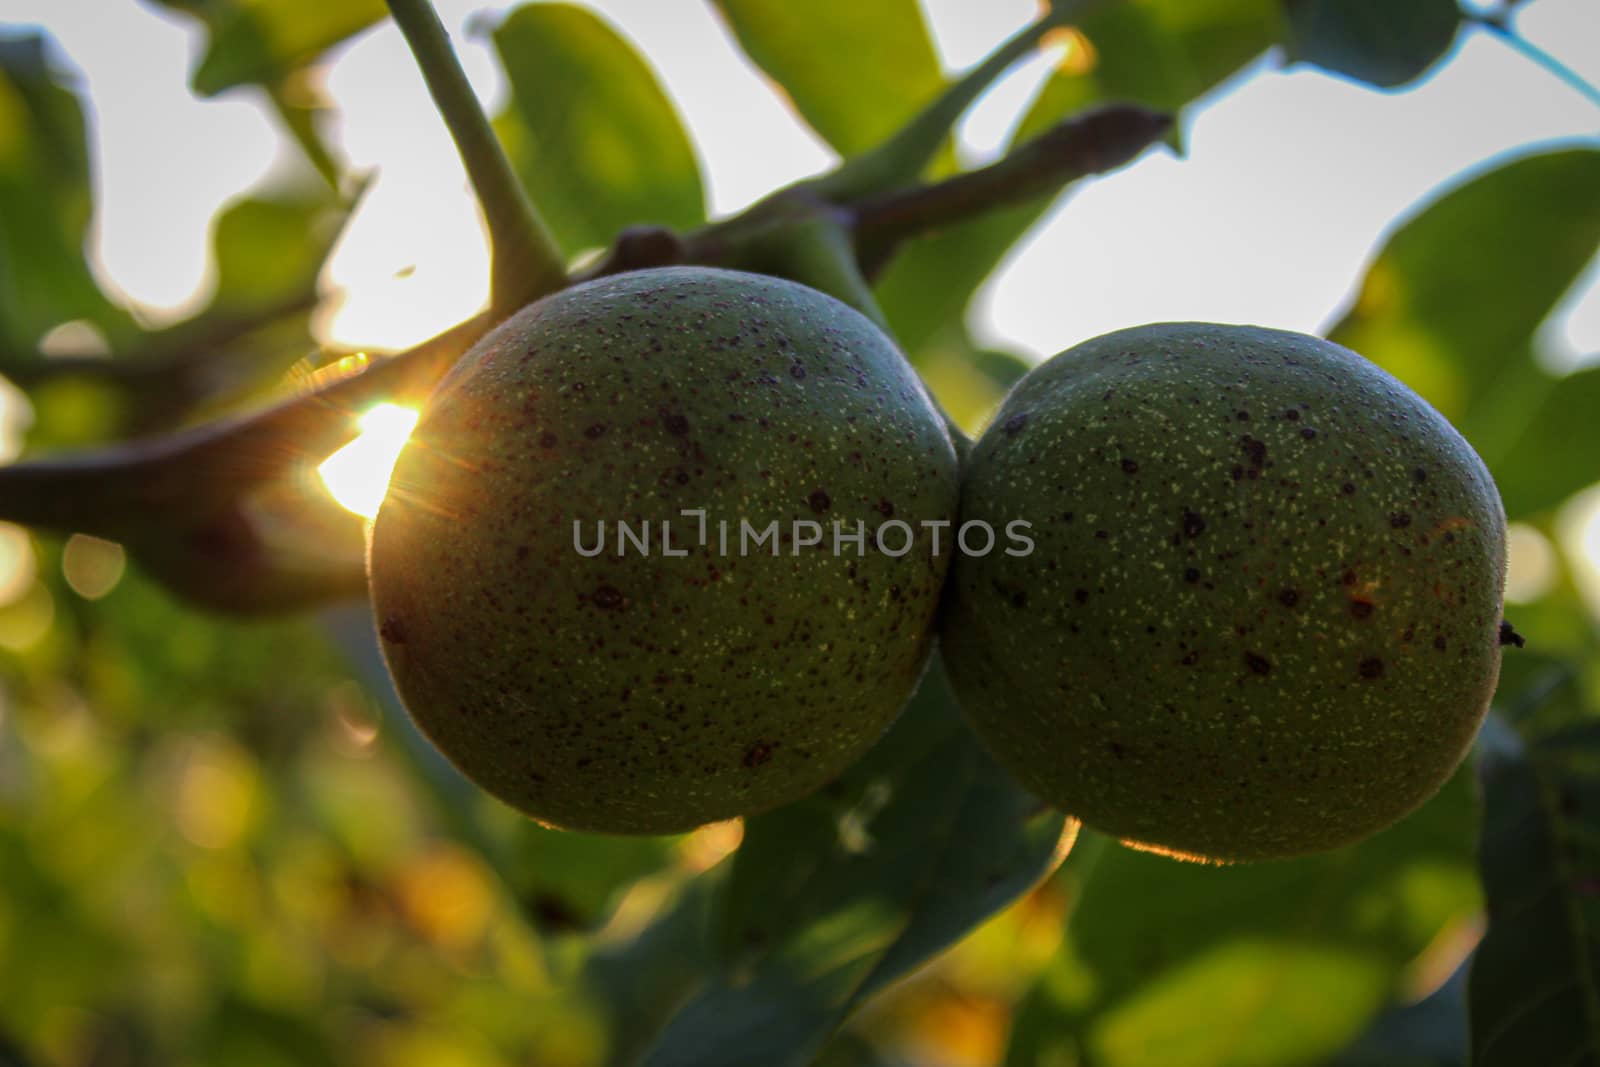 Green unripe walnuts on a branch. Two walnuts on a branch with a leaf in the background. Zavidovici, Bosnia and Herzegovina.